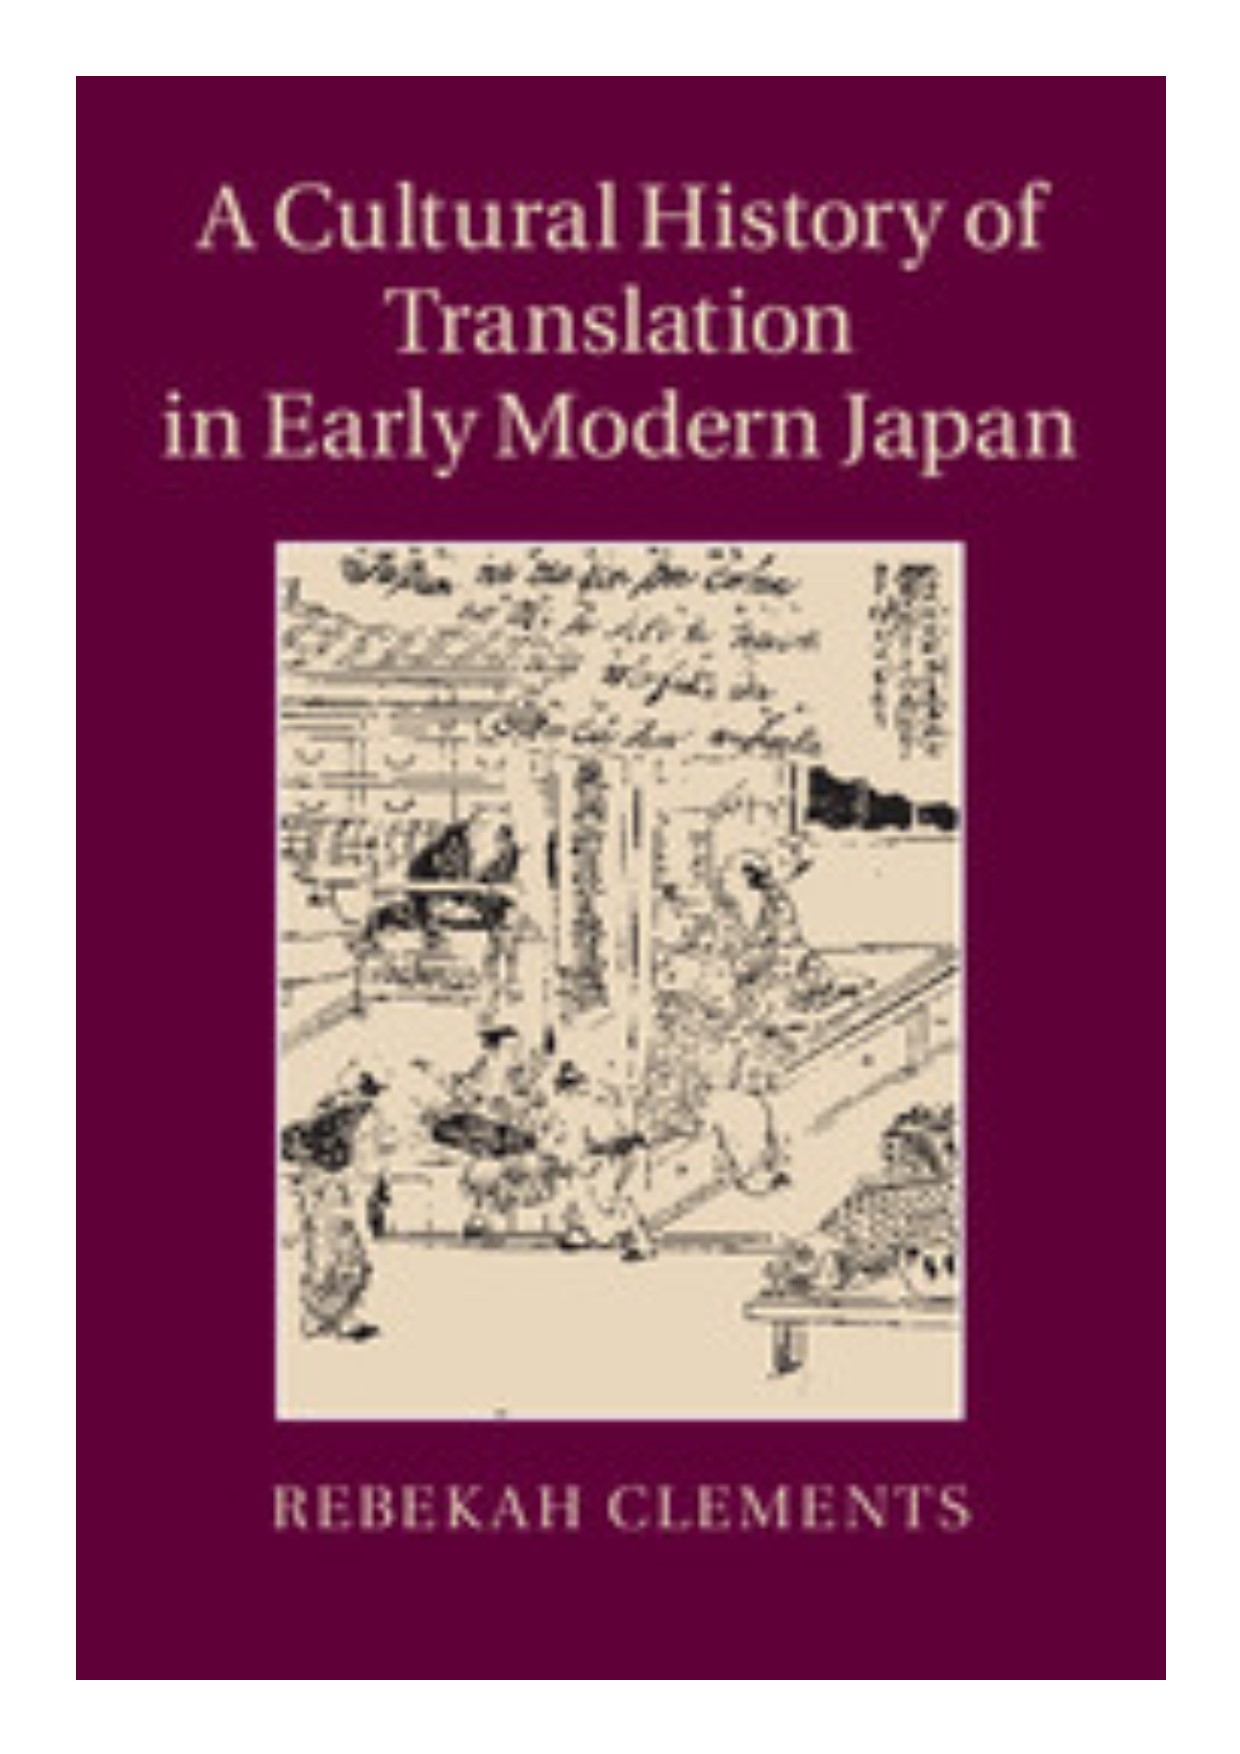 A cultural history of translation in early modern Japan